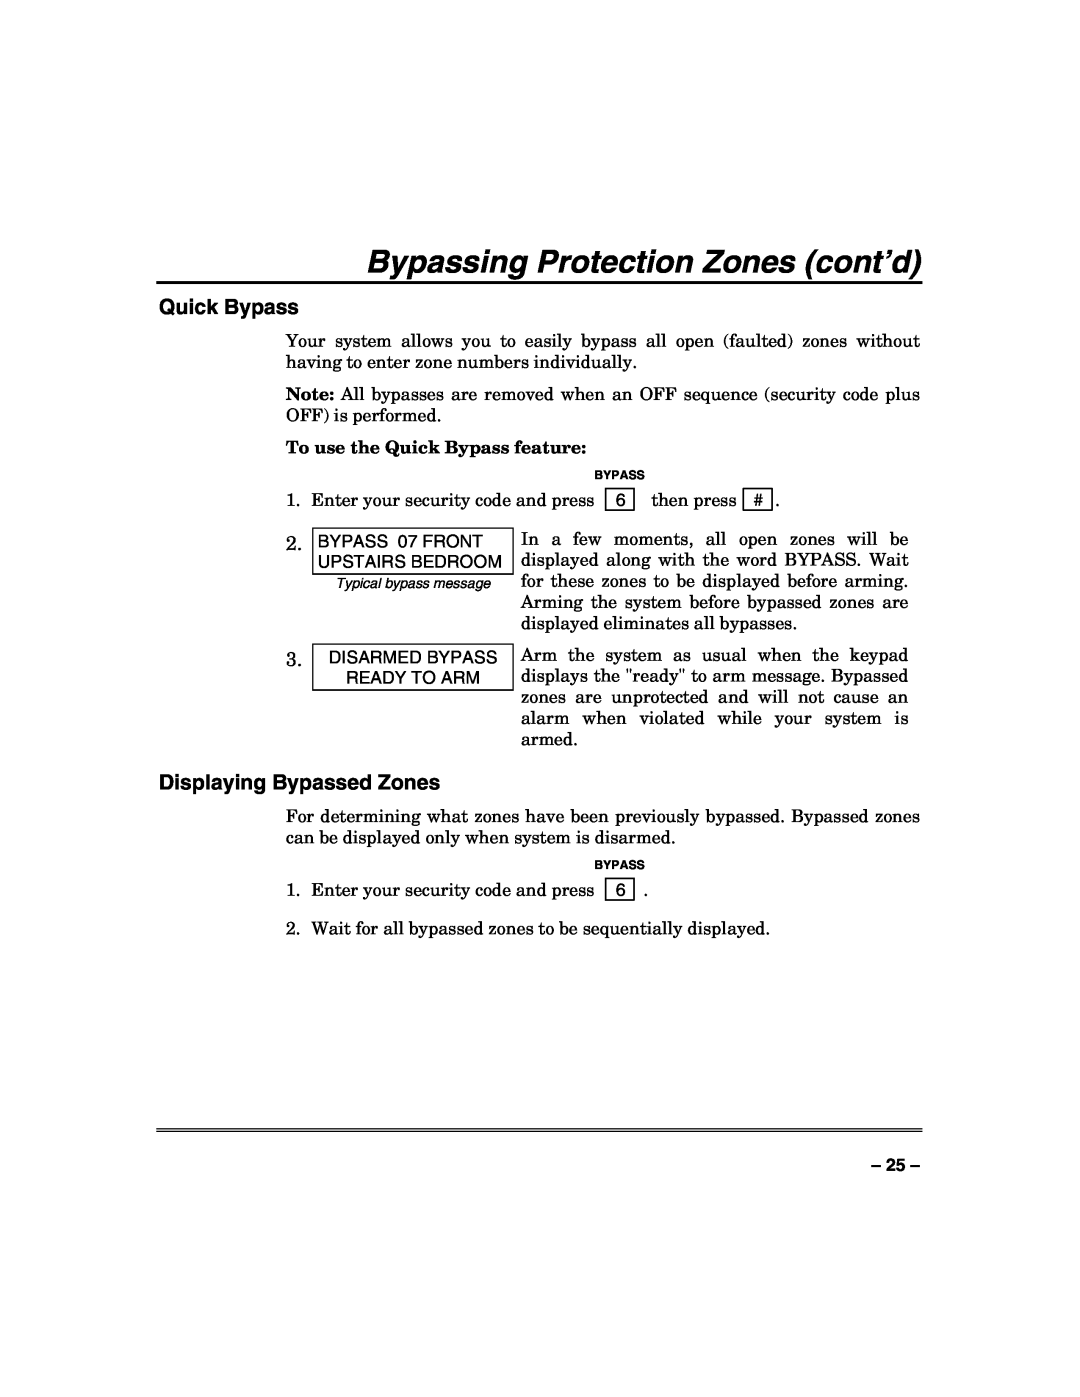 Honeywell N7003V3 manual Bypassing Protection Zones cont’d, Quick Bypass, Displaying Bypassed Zones 